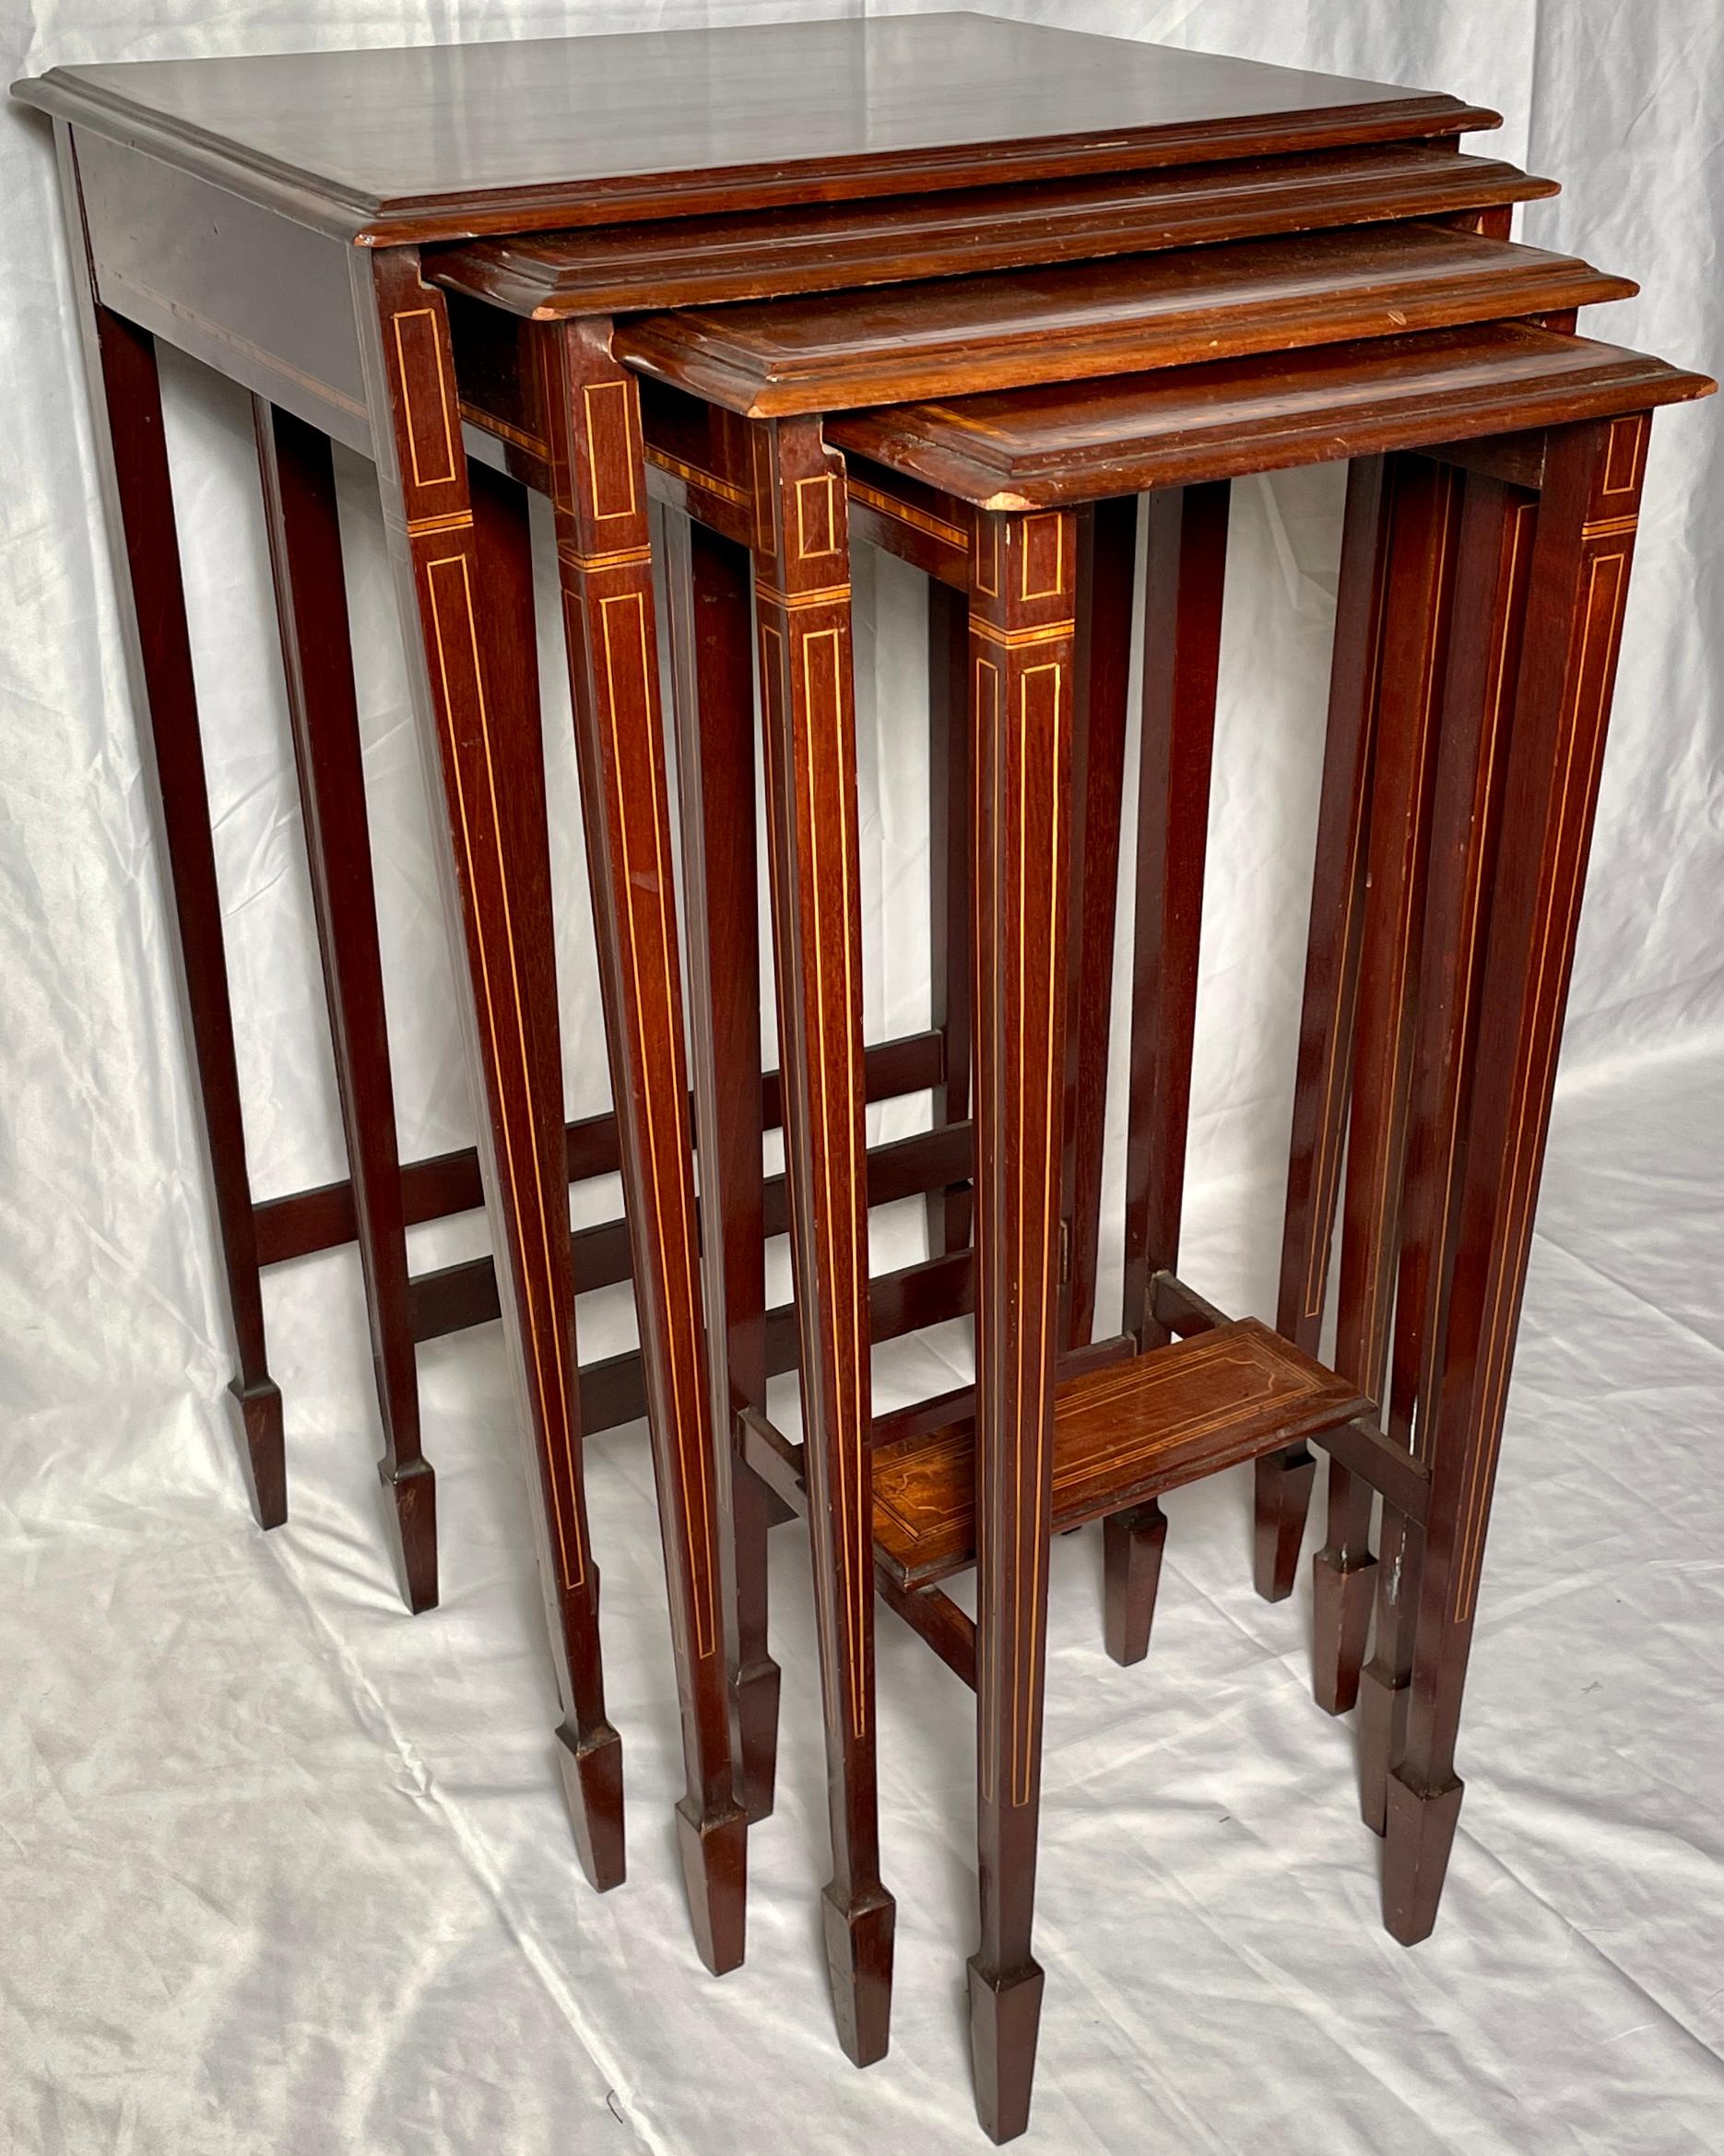 Set of 4 Antique English Mahogany Serving Tables, Circa 1890-1900 In Good Condition For Sale In New Orleans, LA